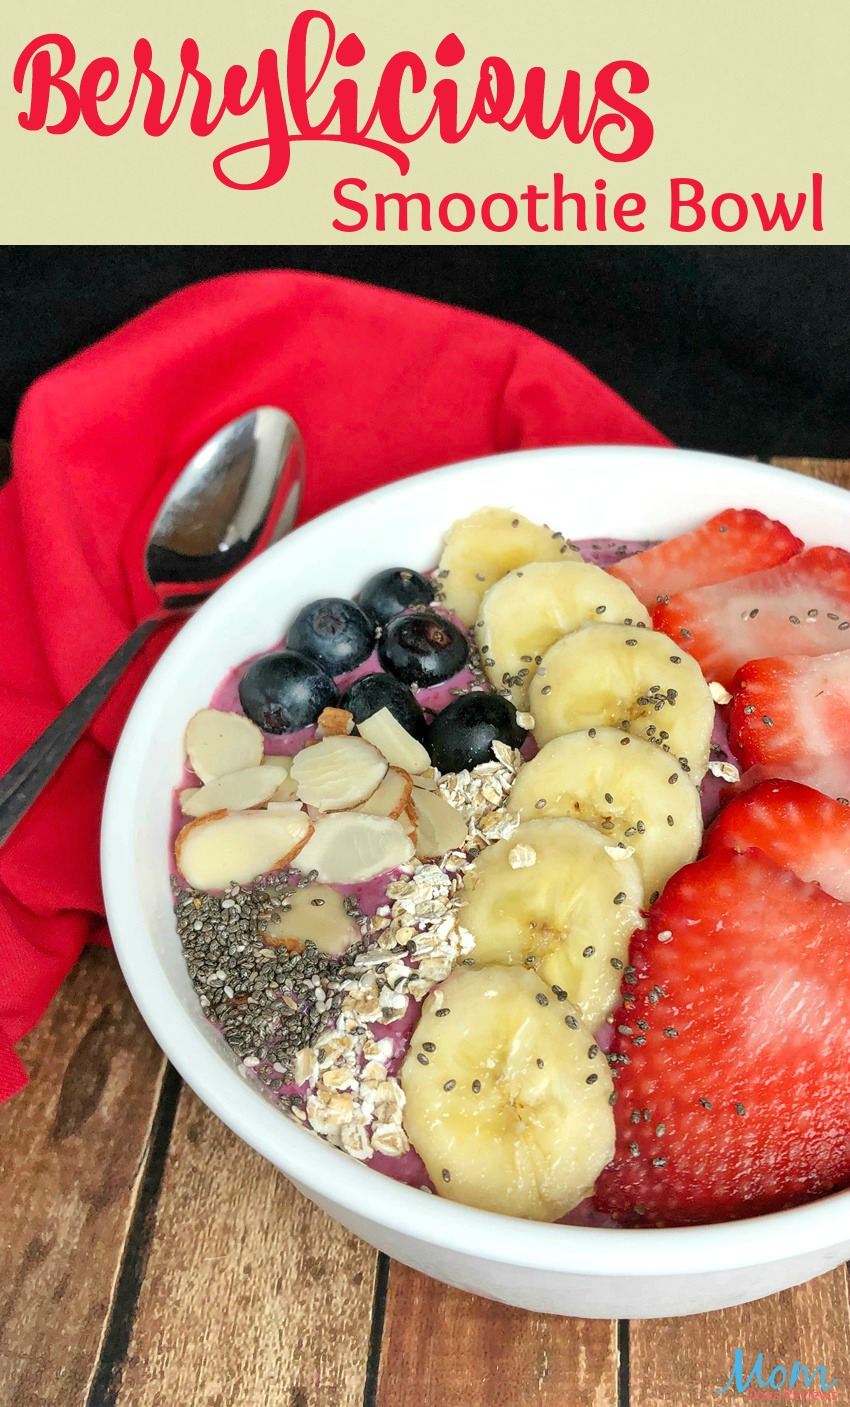 Berrylicious Smoothie Bowl Recipe: Easy, Quick and Satisfying! #recipe #food #foodie #breakfast #getinmybelly #yummy #strawberry #healthyfoods